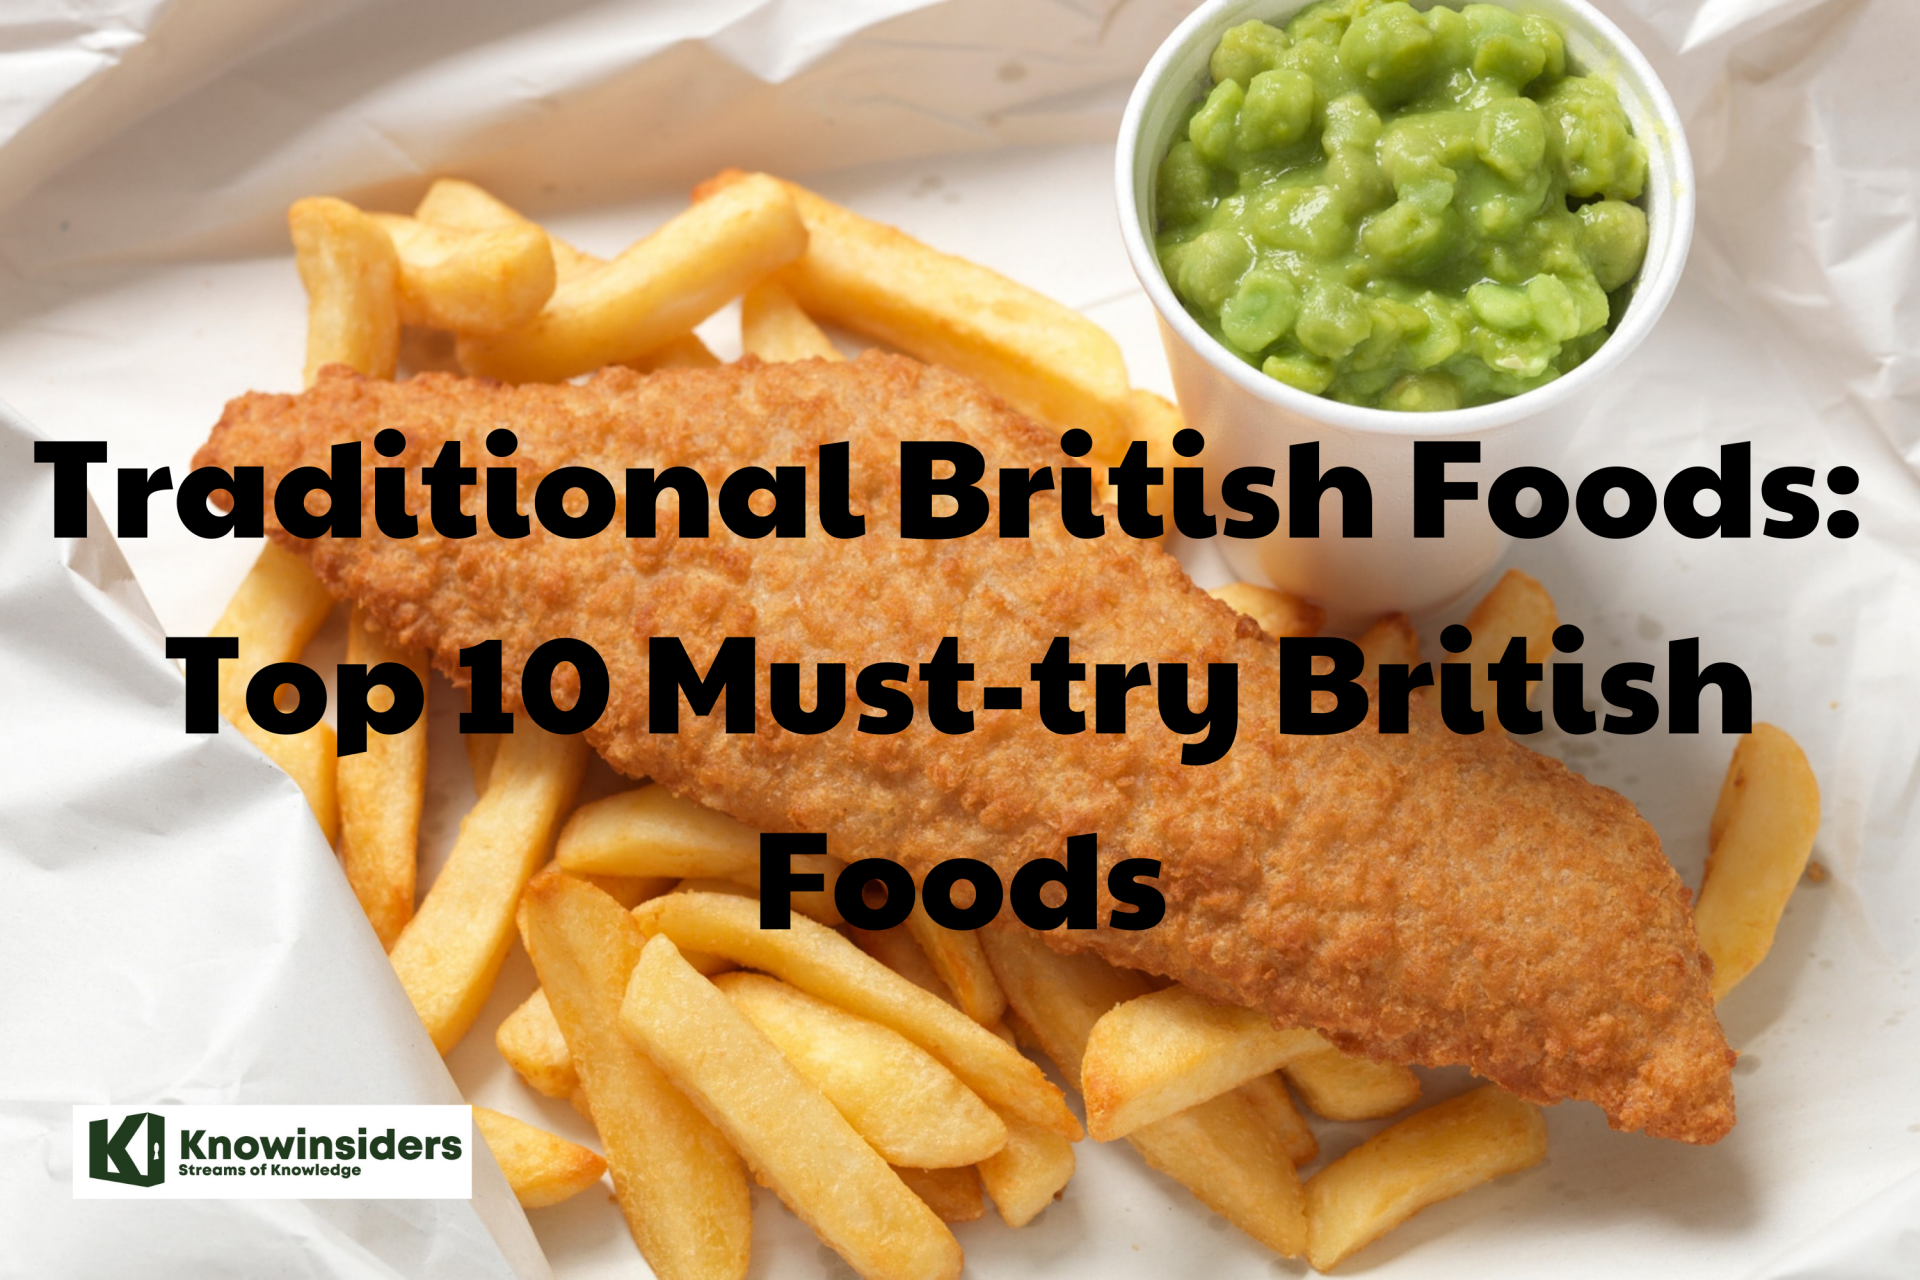 Traditional British Foods: Top 10 Must-try British Foods